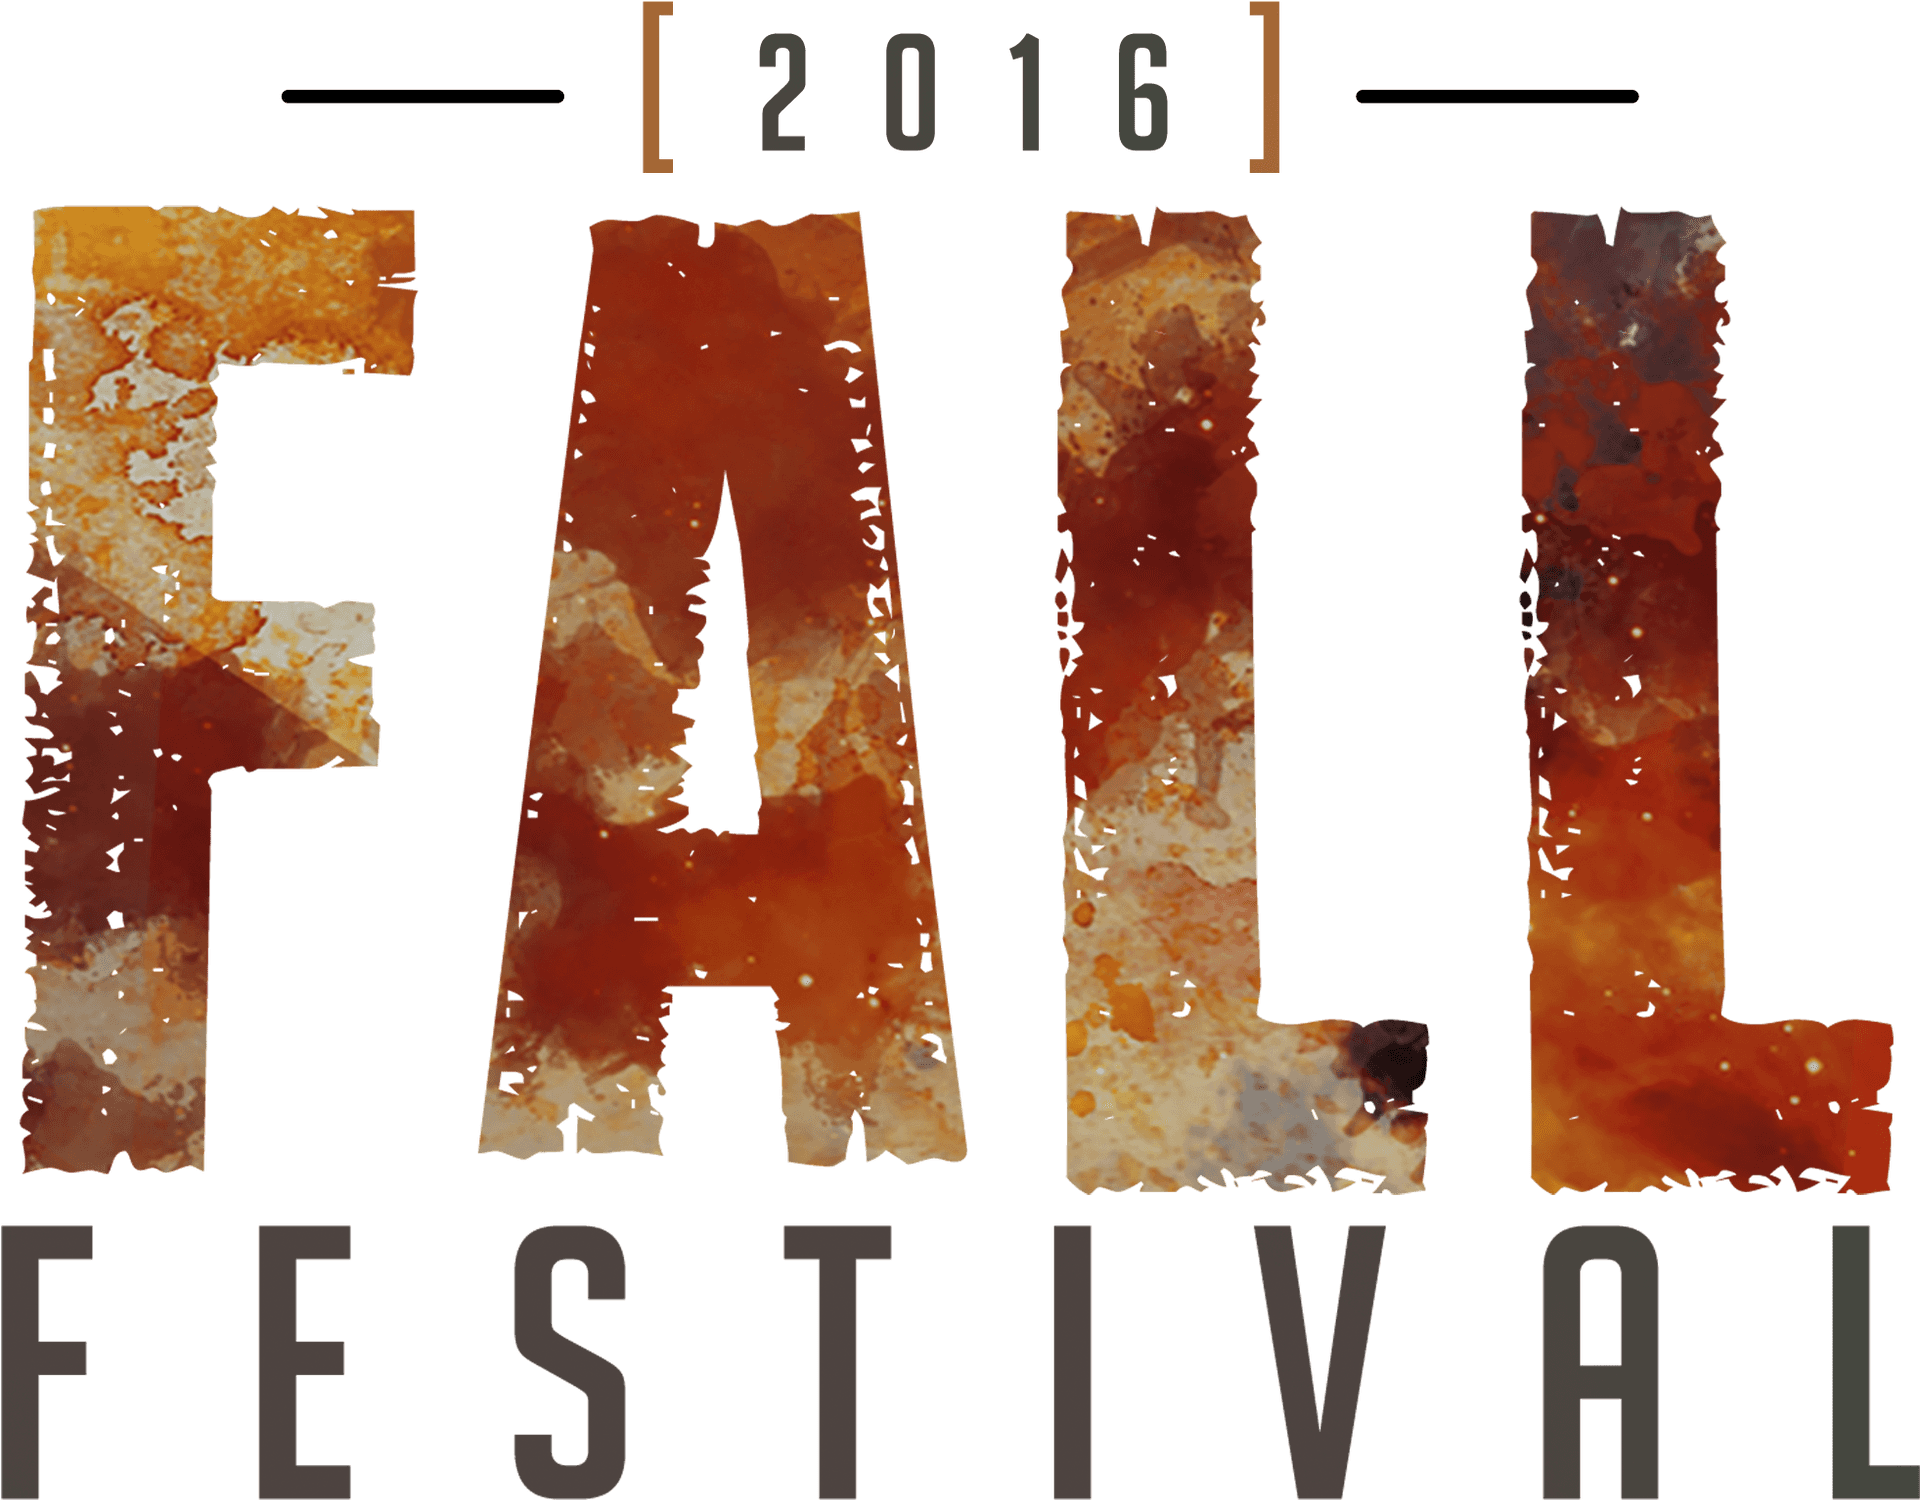 Fall Festival2016 Poster PNG